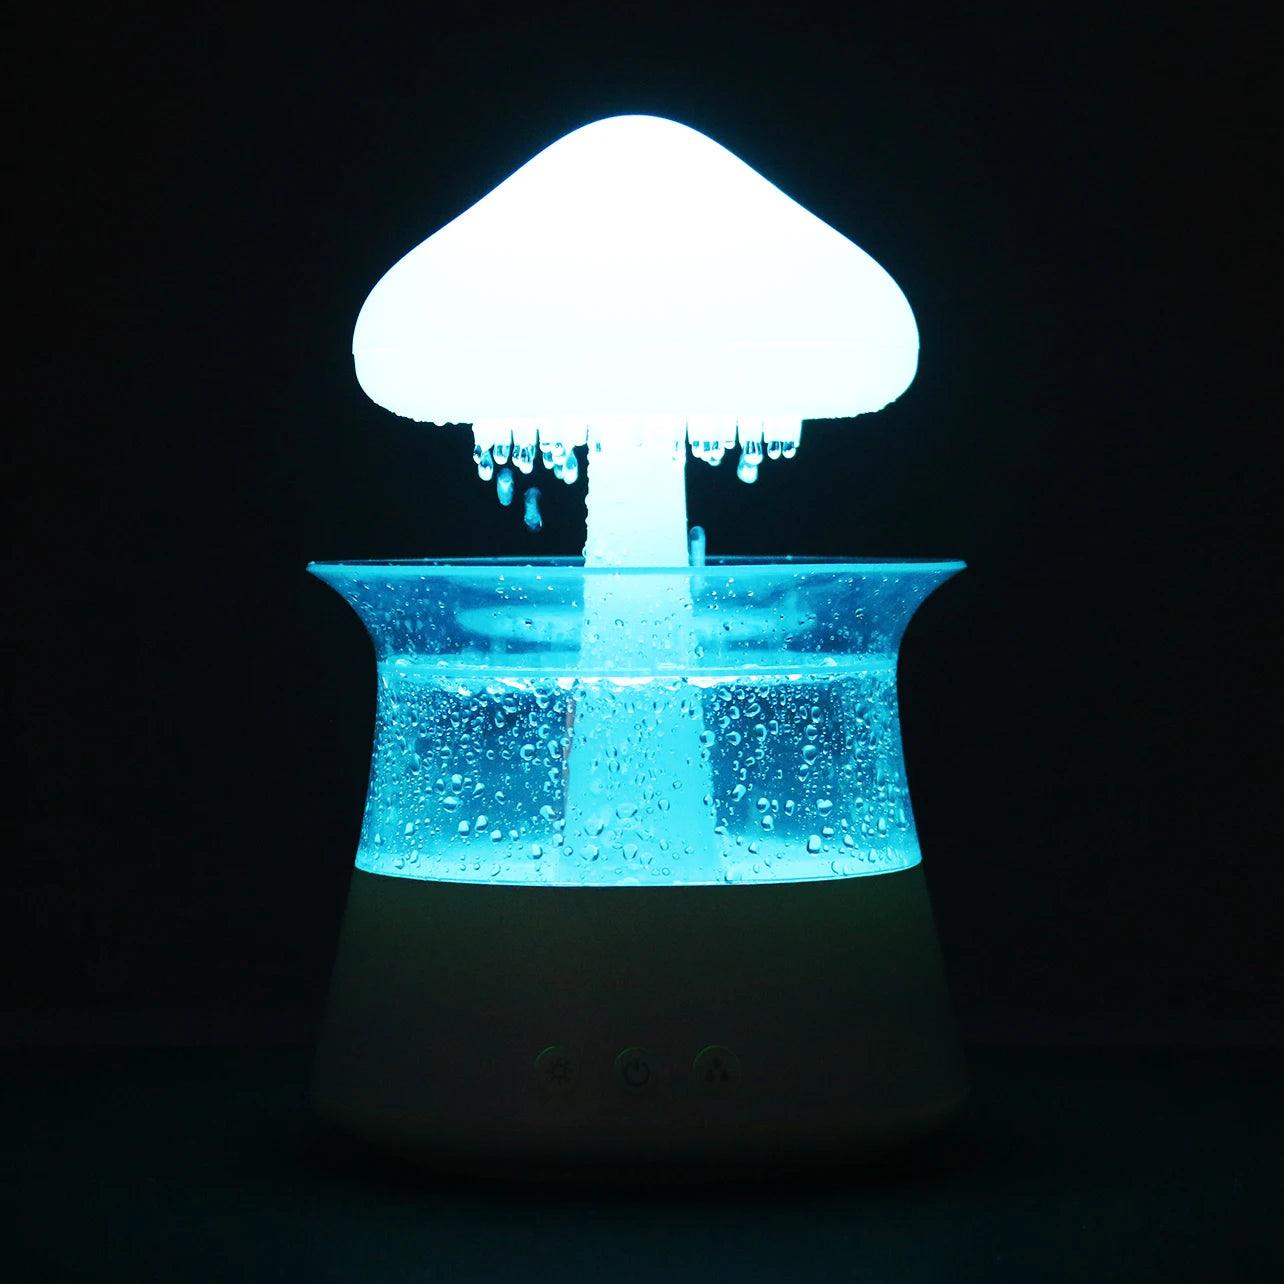 Cloud Discoveries 450ml Mushroom Rain Cloud Air Humidifier - Essential Oil Diffuser with Colorful Night Light.